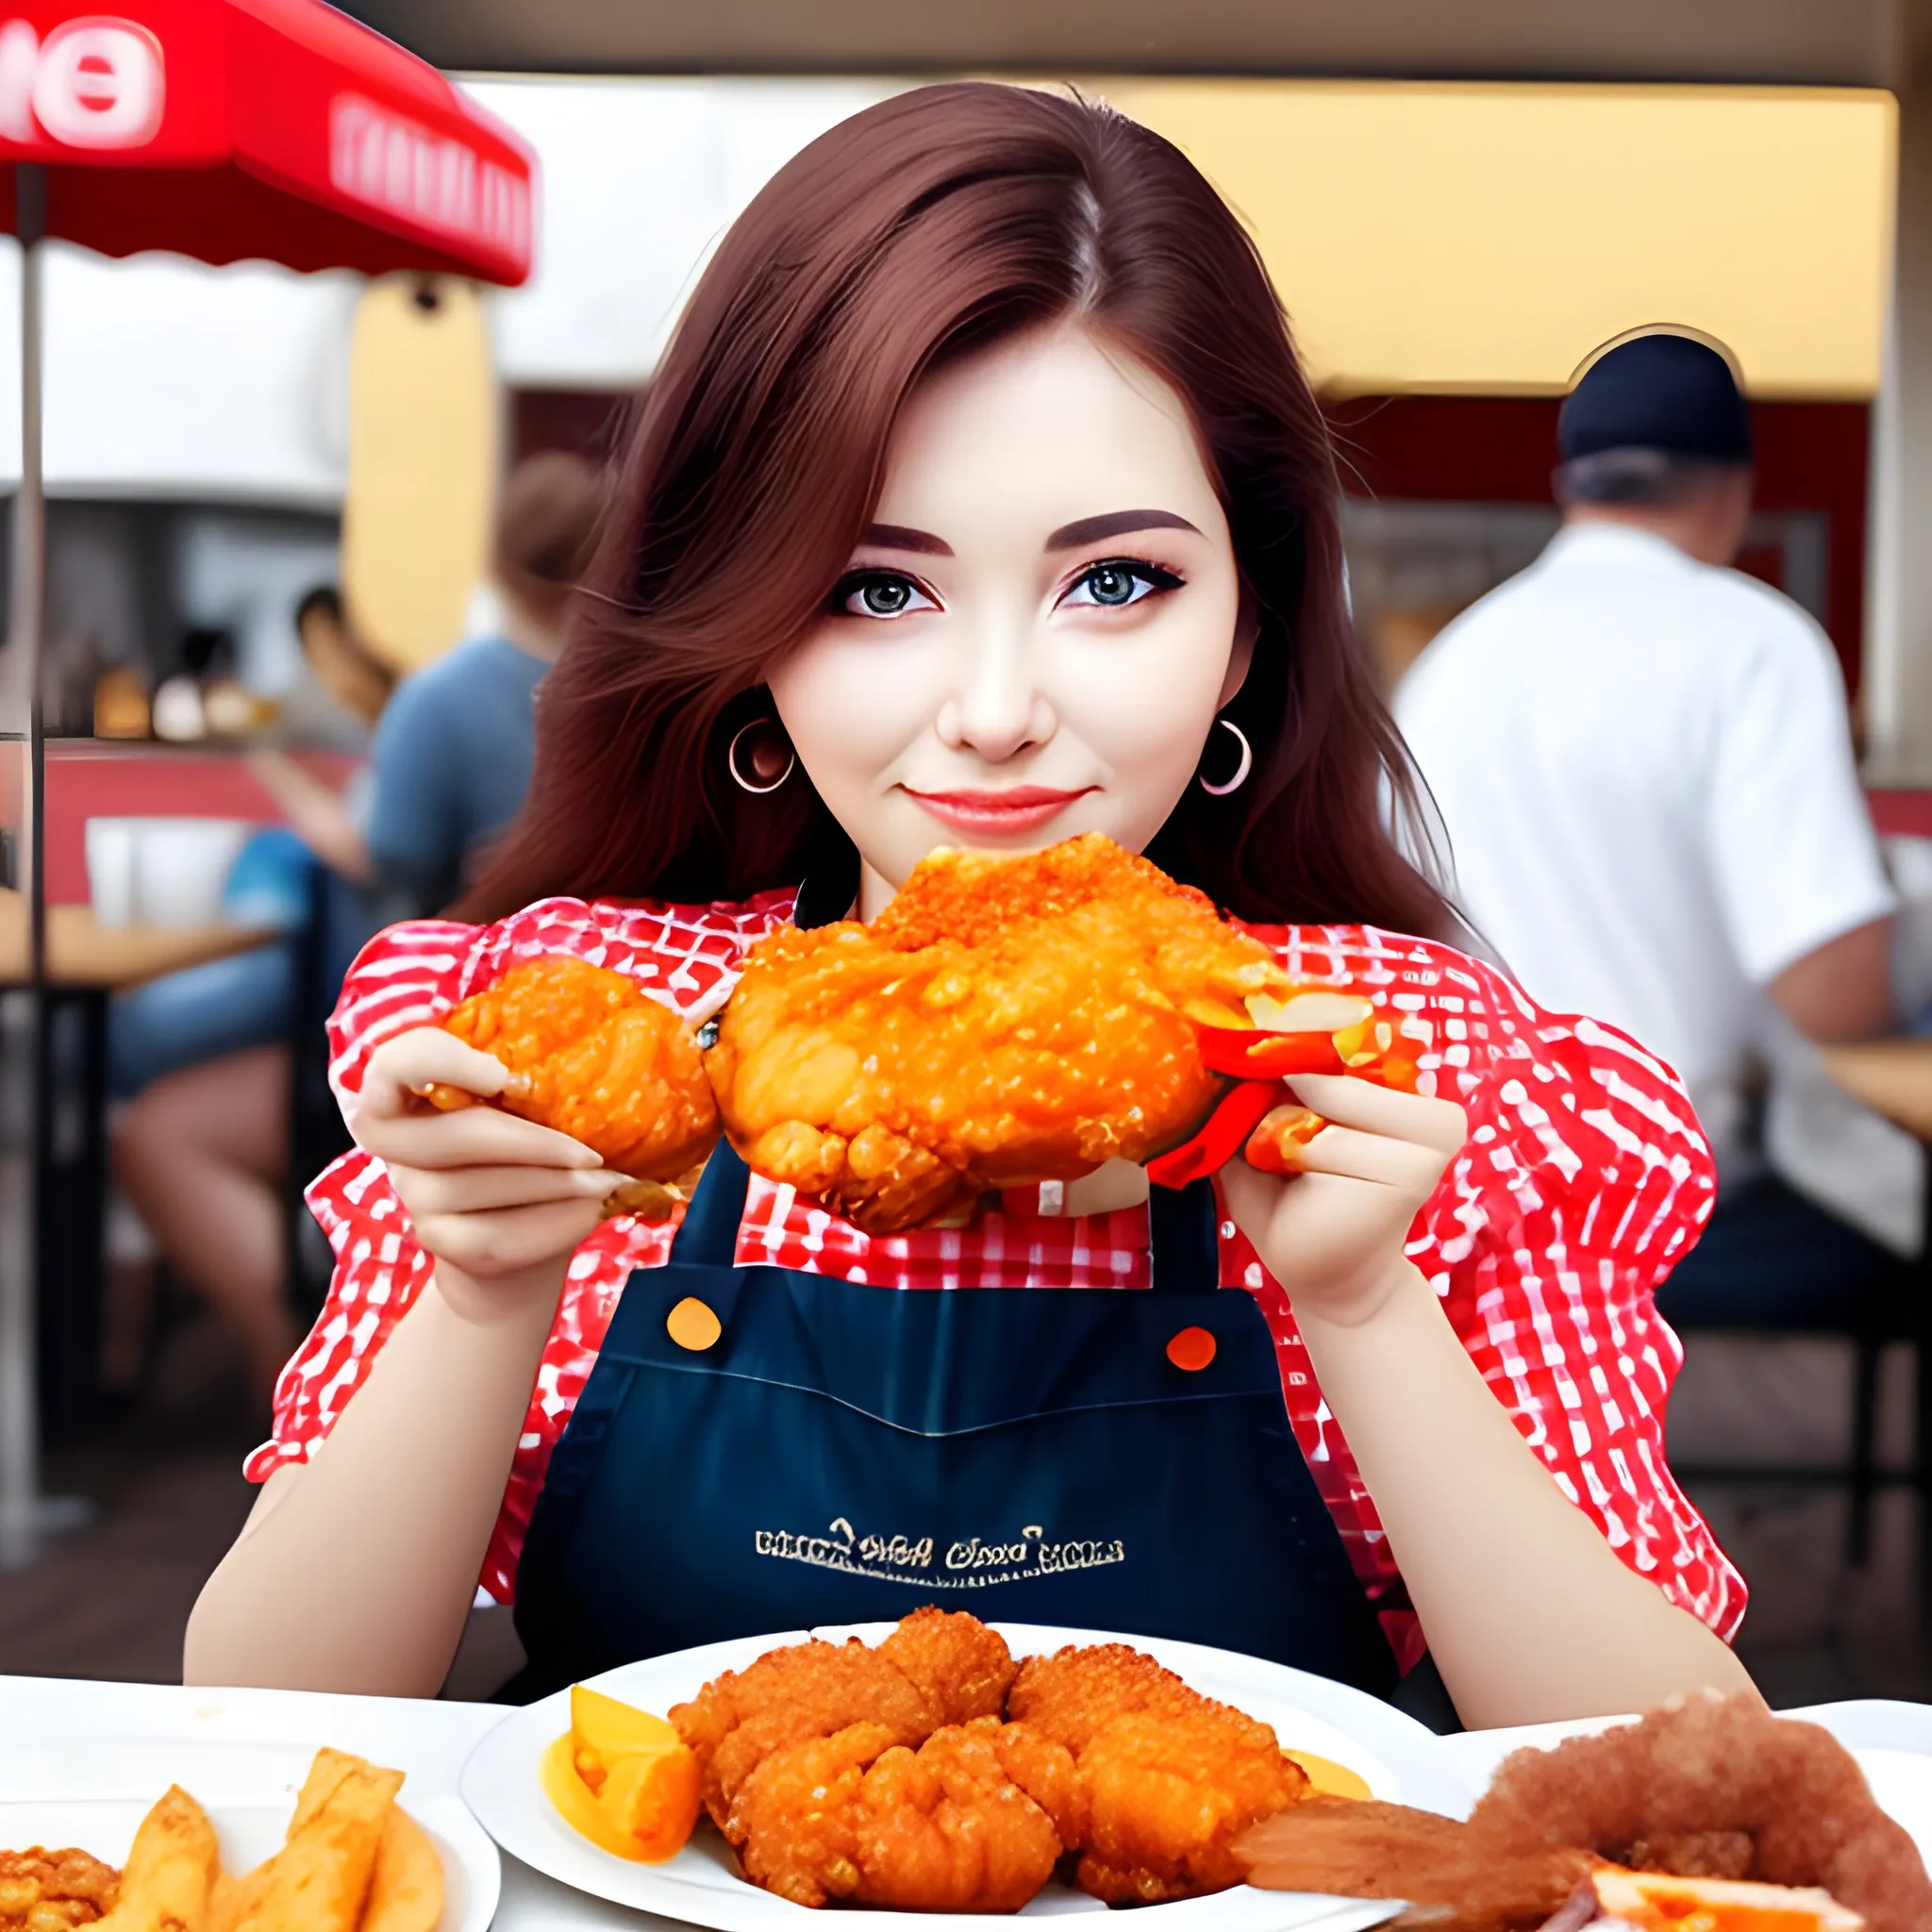 Beautiful lady eating fried chicken